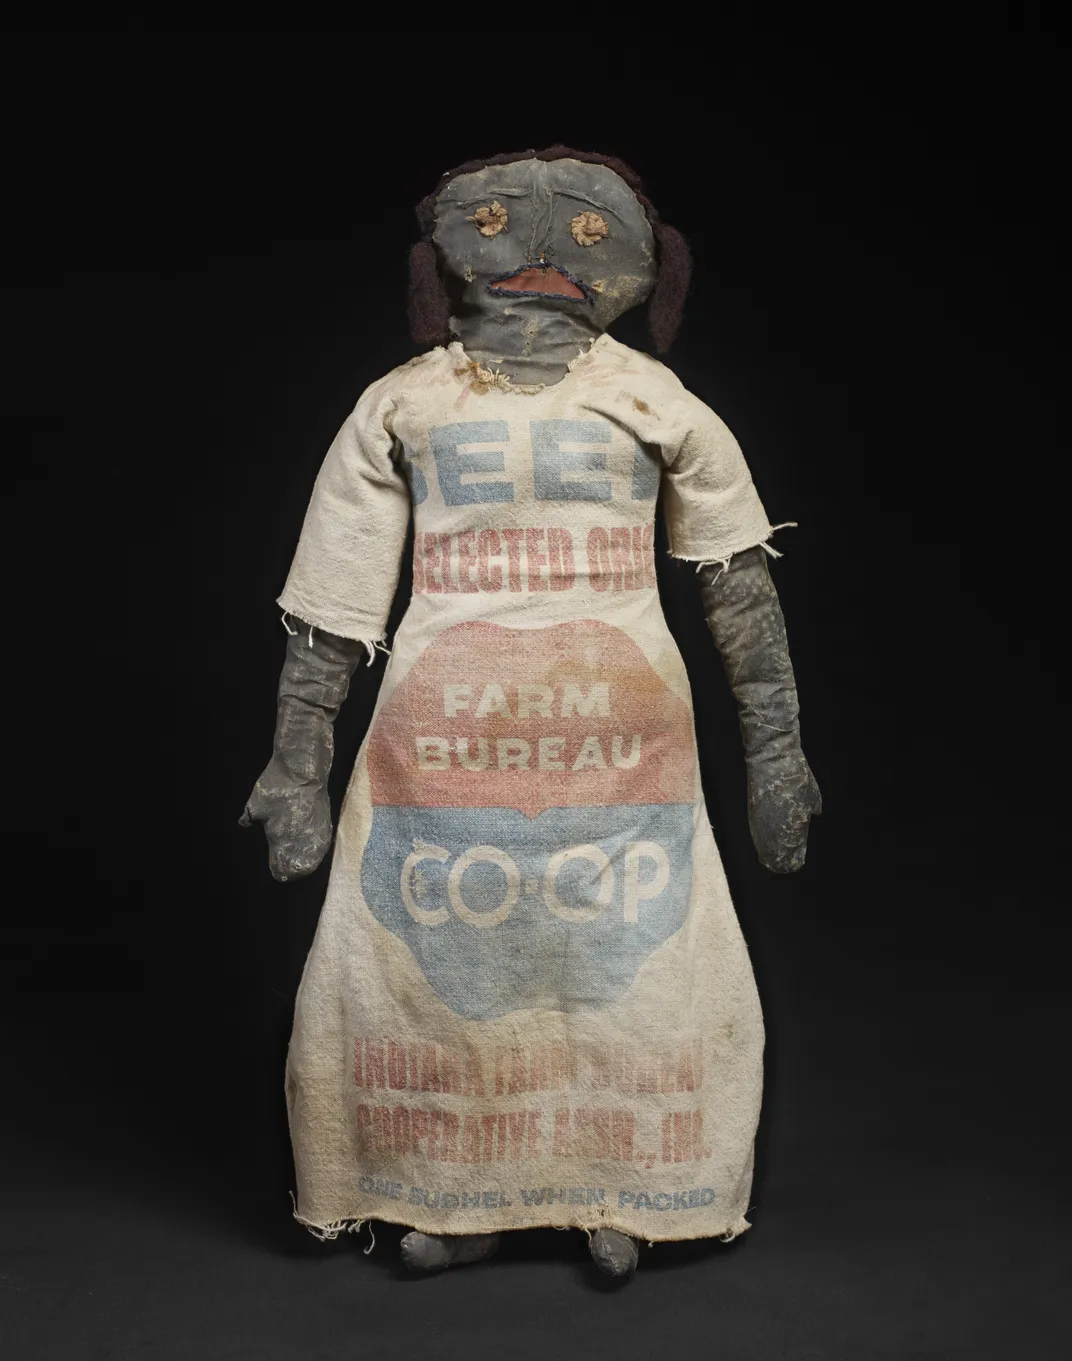 A female Black doll, worn by time, wearing a dress made out of a recycled feed sack